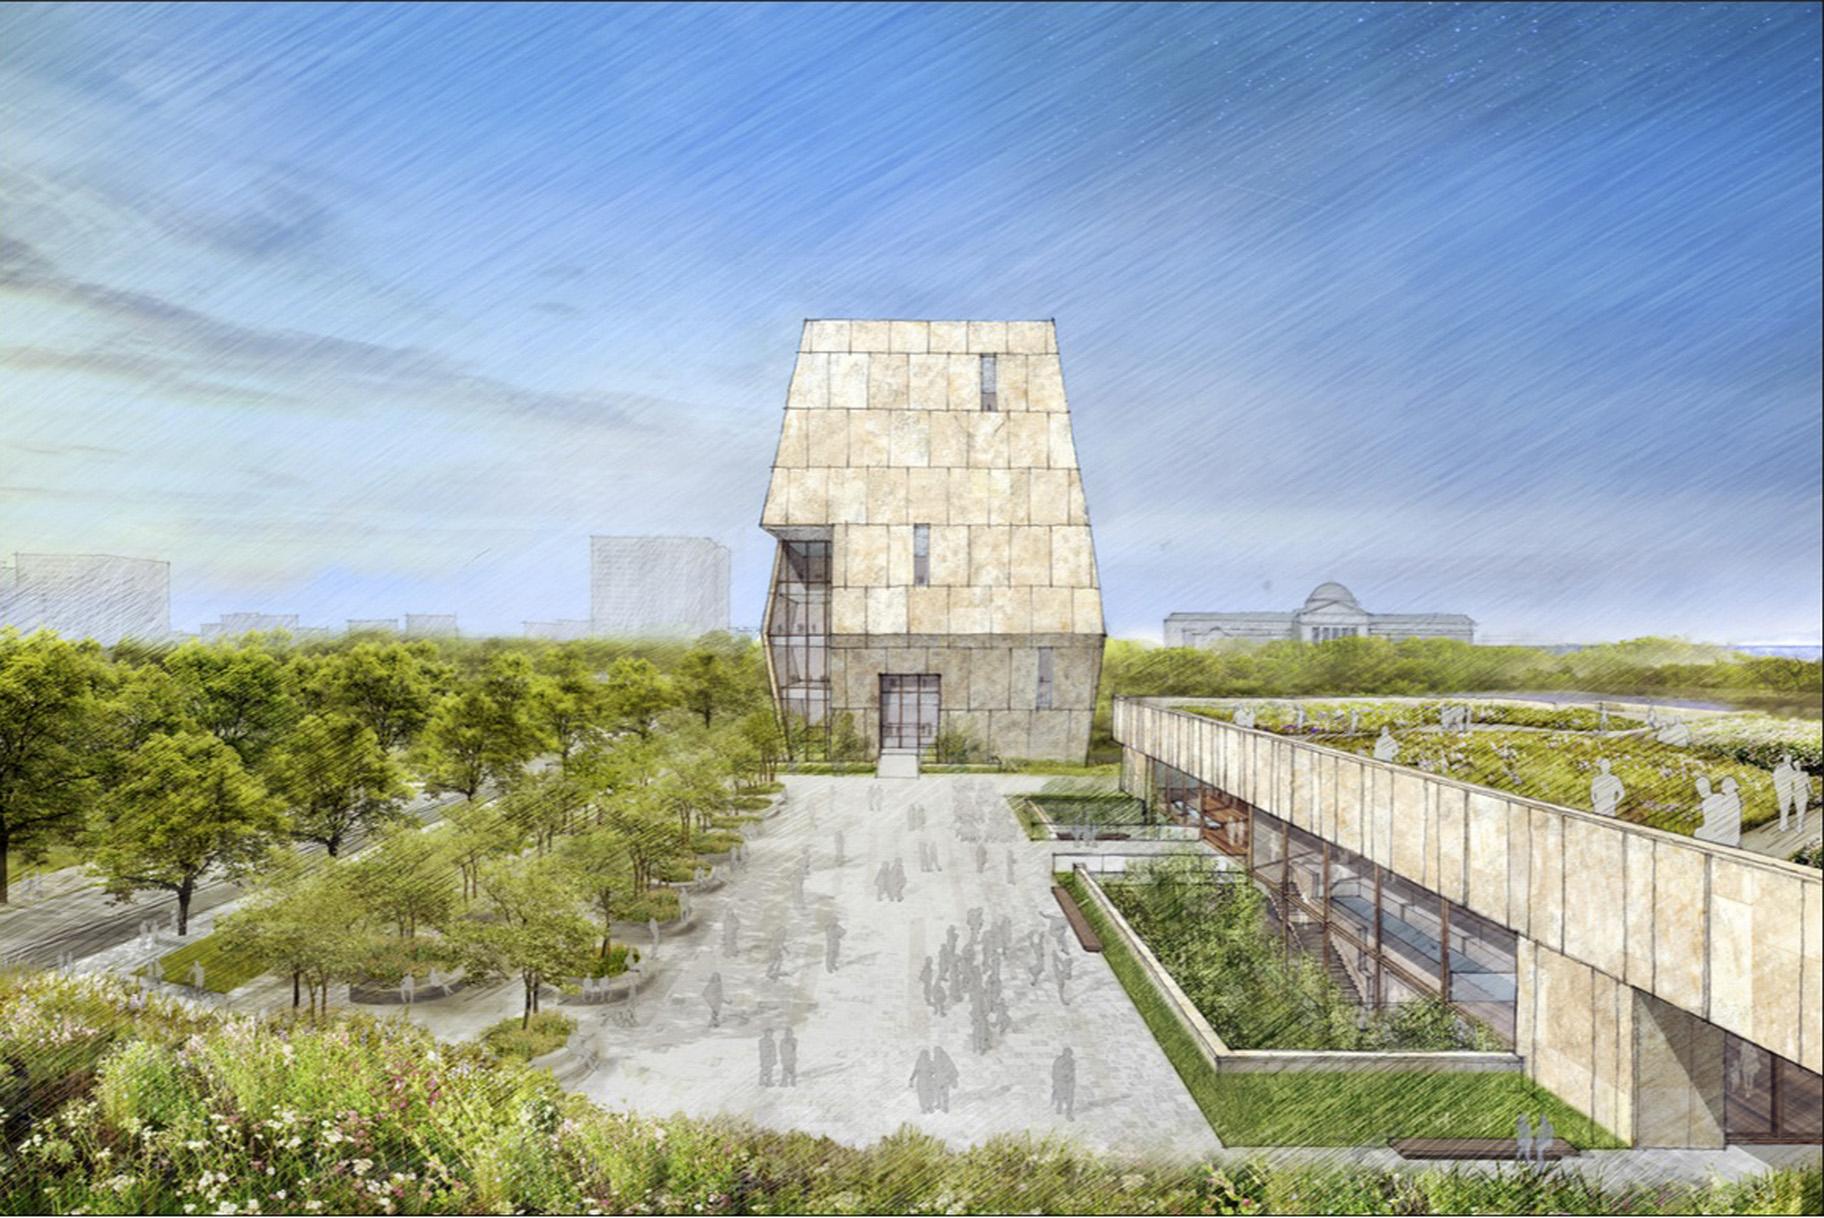 This illustration released on May 3, 2017 by the Obama Foundation shows plans for the proposed Obama Presidential Center with a museum, rear, in Jackson Park on Chicago's South Side. (Obama Foundation via AP, File)